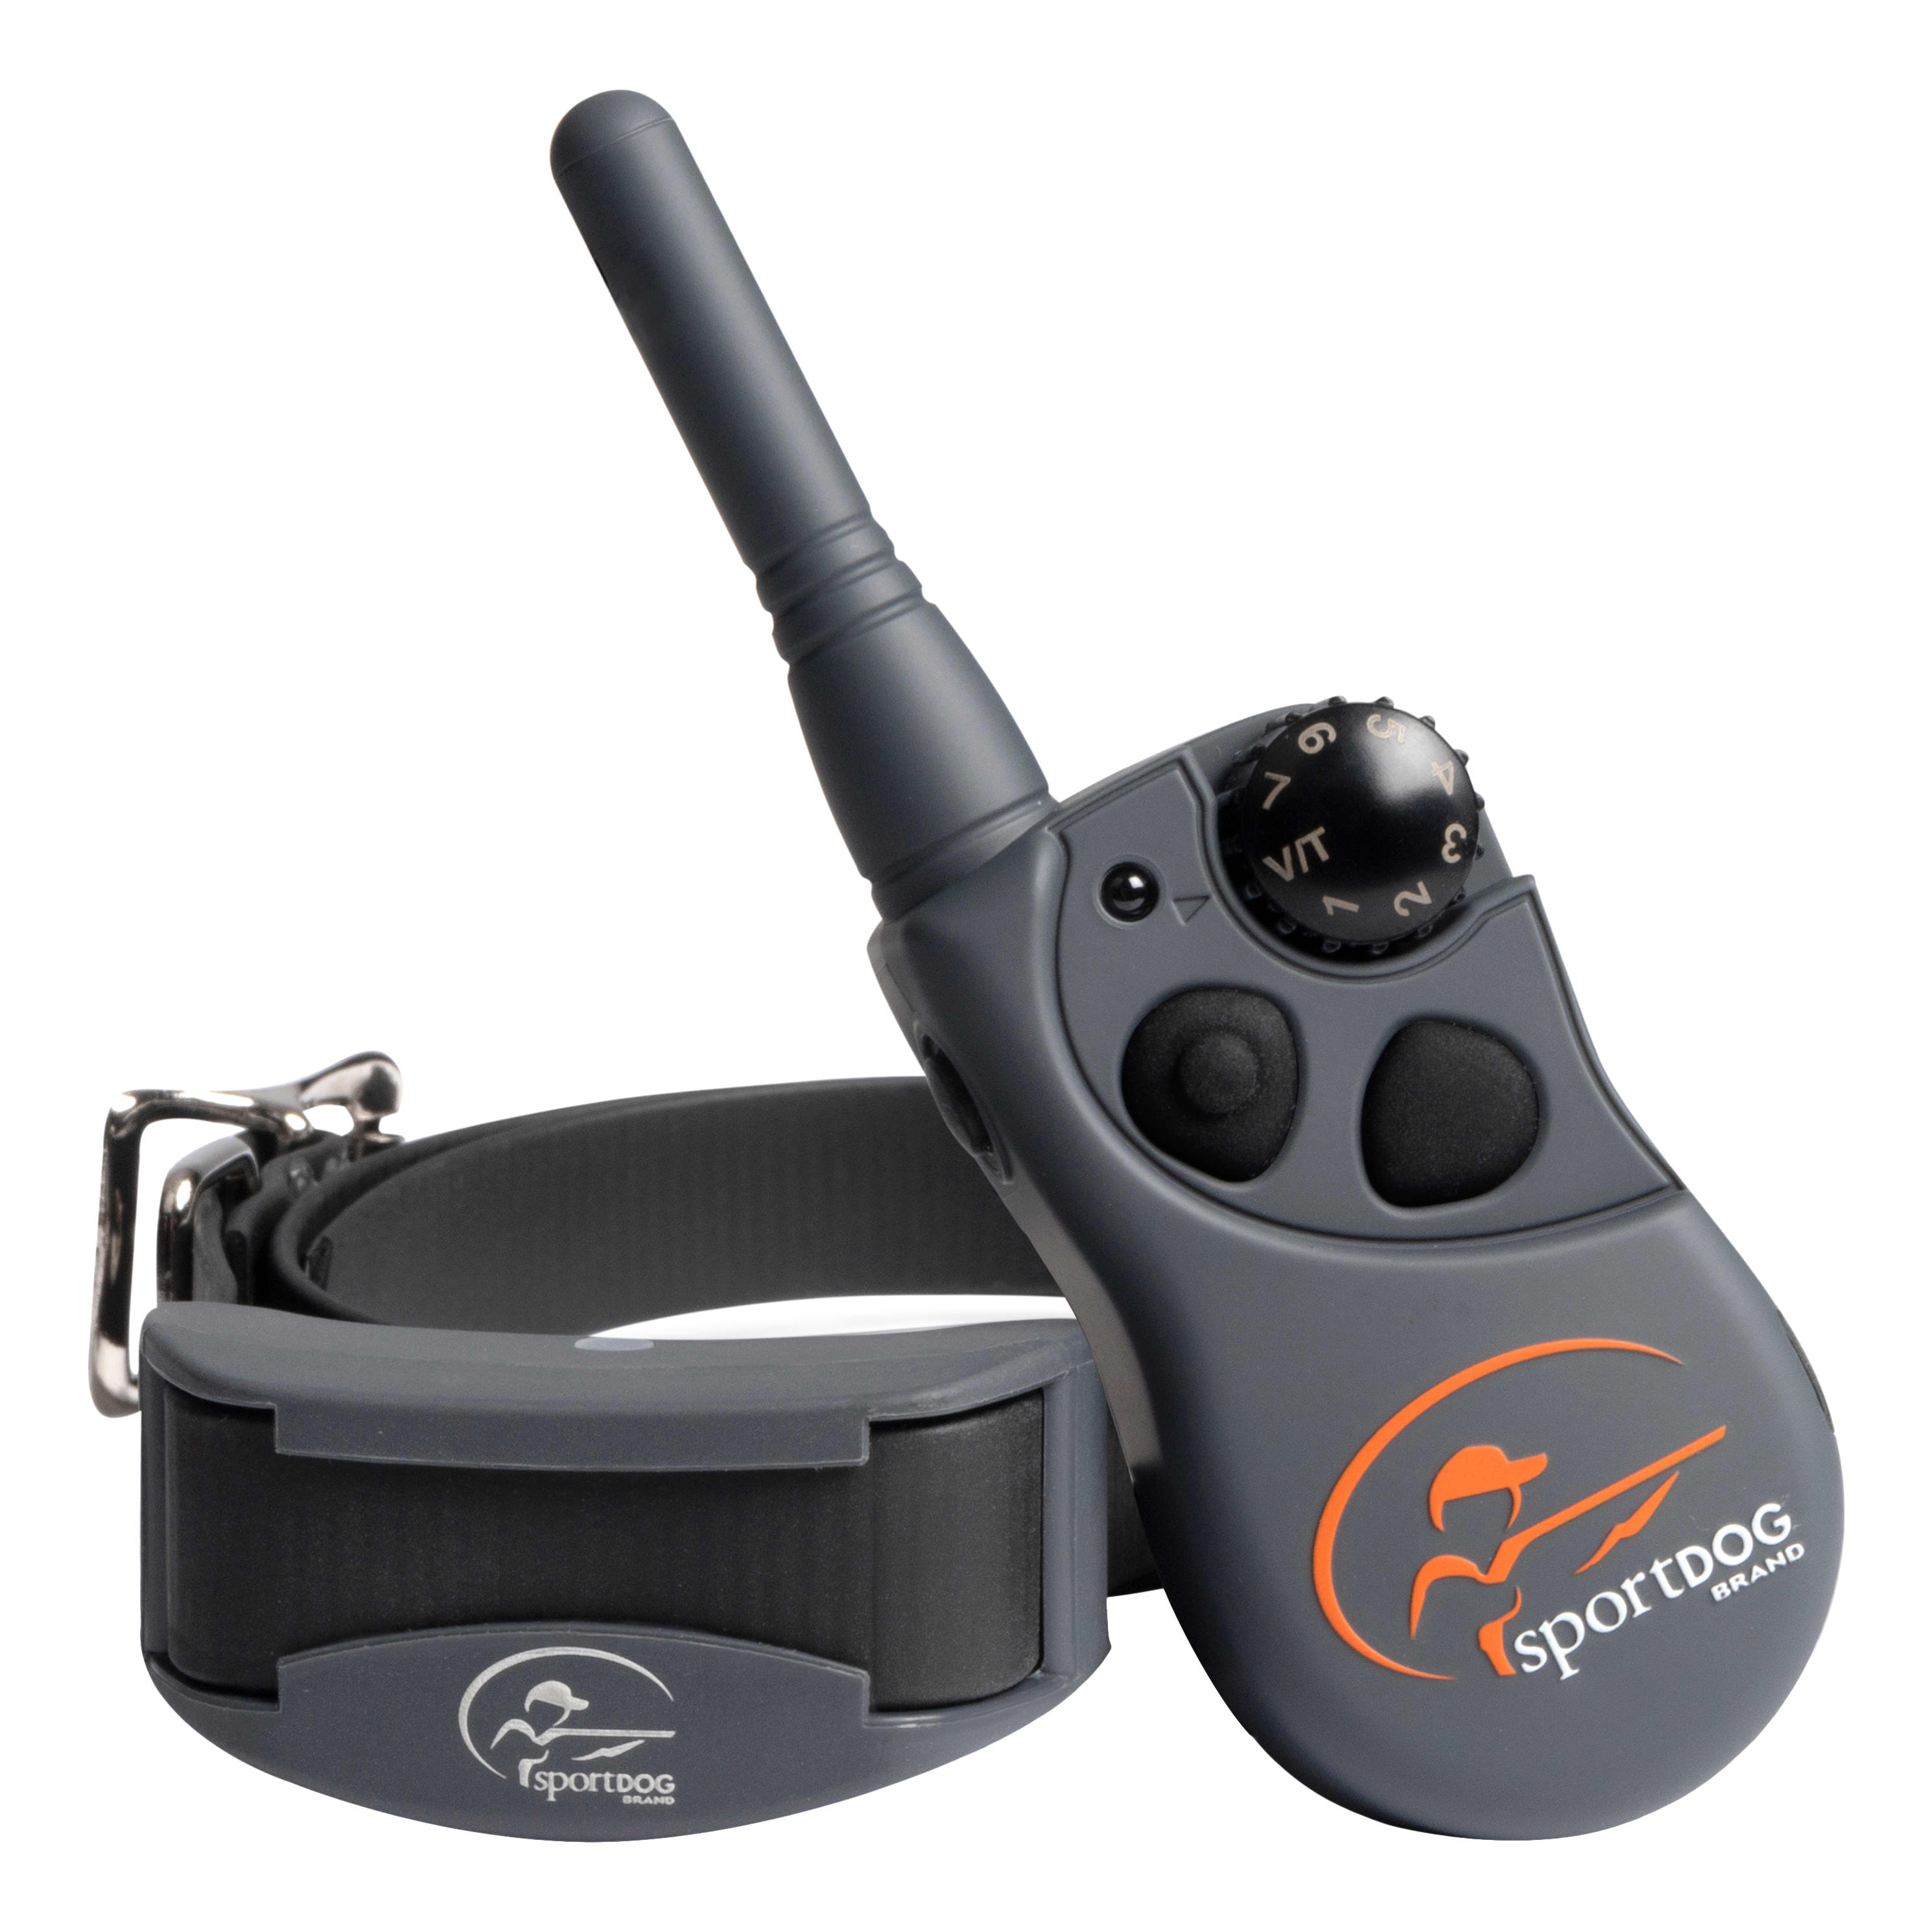 SportDOG FS-AD Add-A-Dog Collar, Compatible with FieldSentinel 825 & 1825  Series, Enhance Your Training System, Waterproof, Rechargeable,  Adjustable